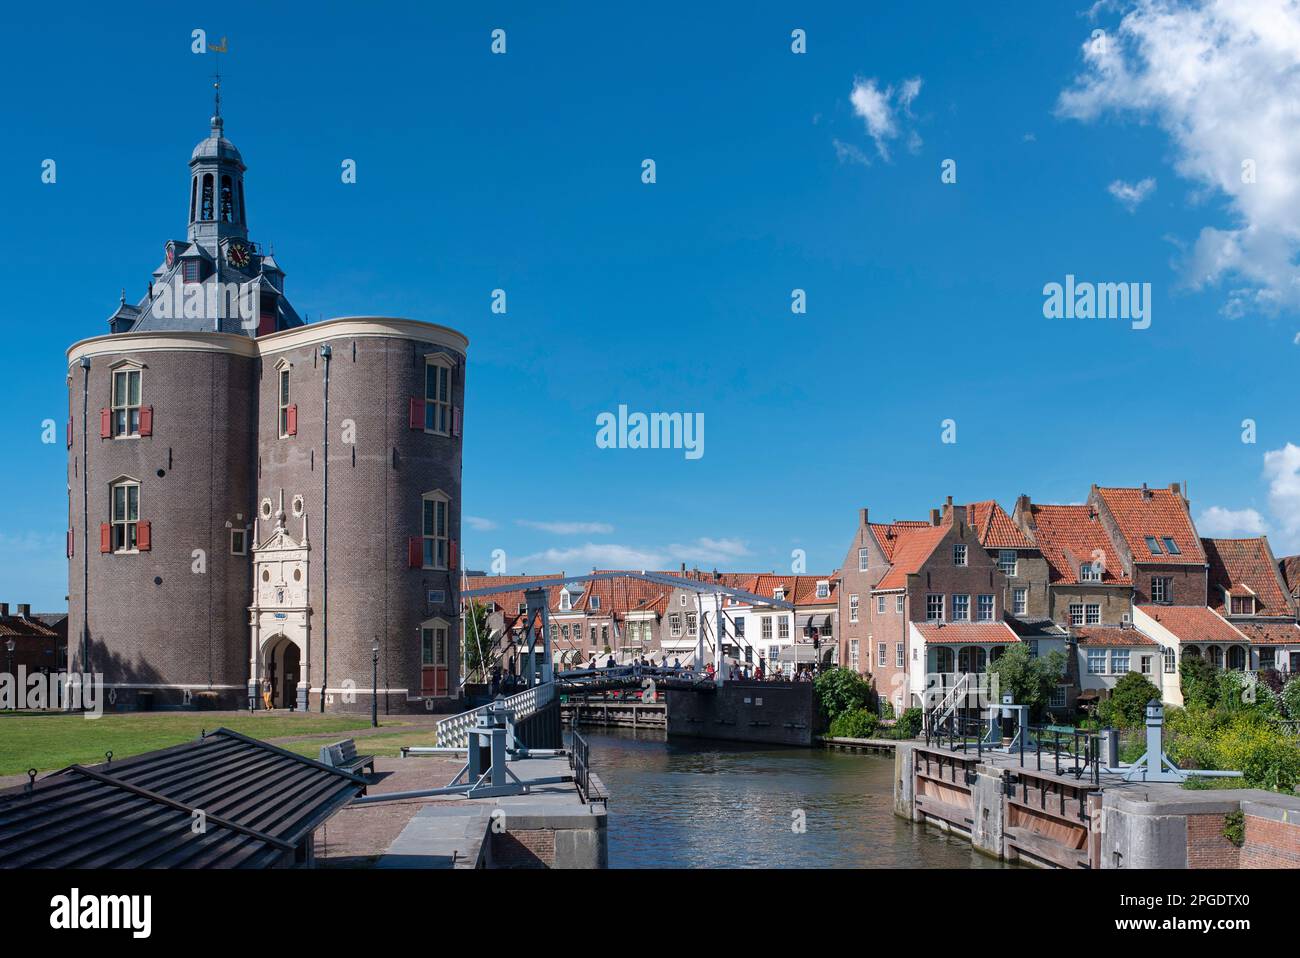 Cityscape with the former defense tower dromedaris and the entrance to the old port, Enkhuizen, North Holland, Netherlands, Europe Stock Photo